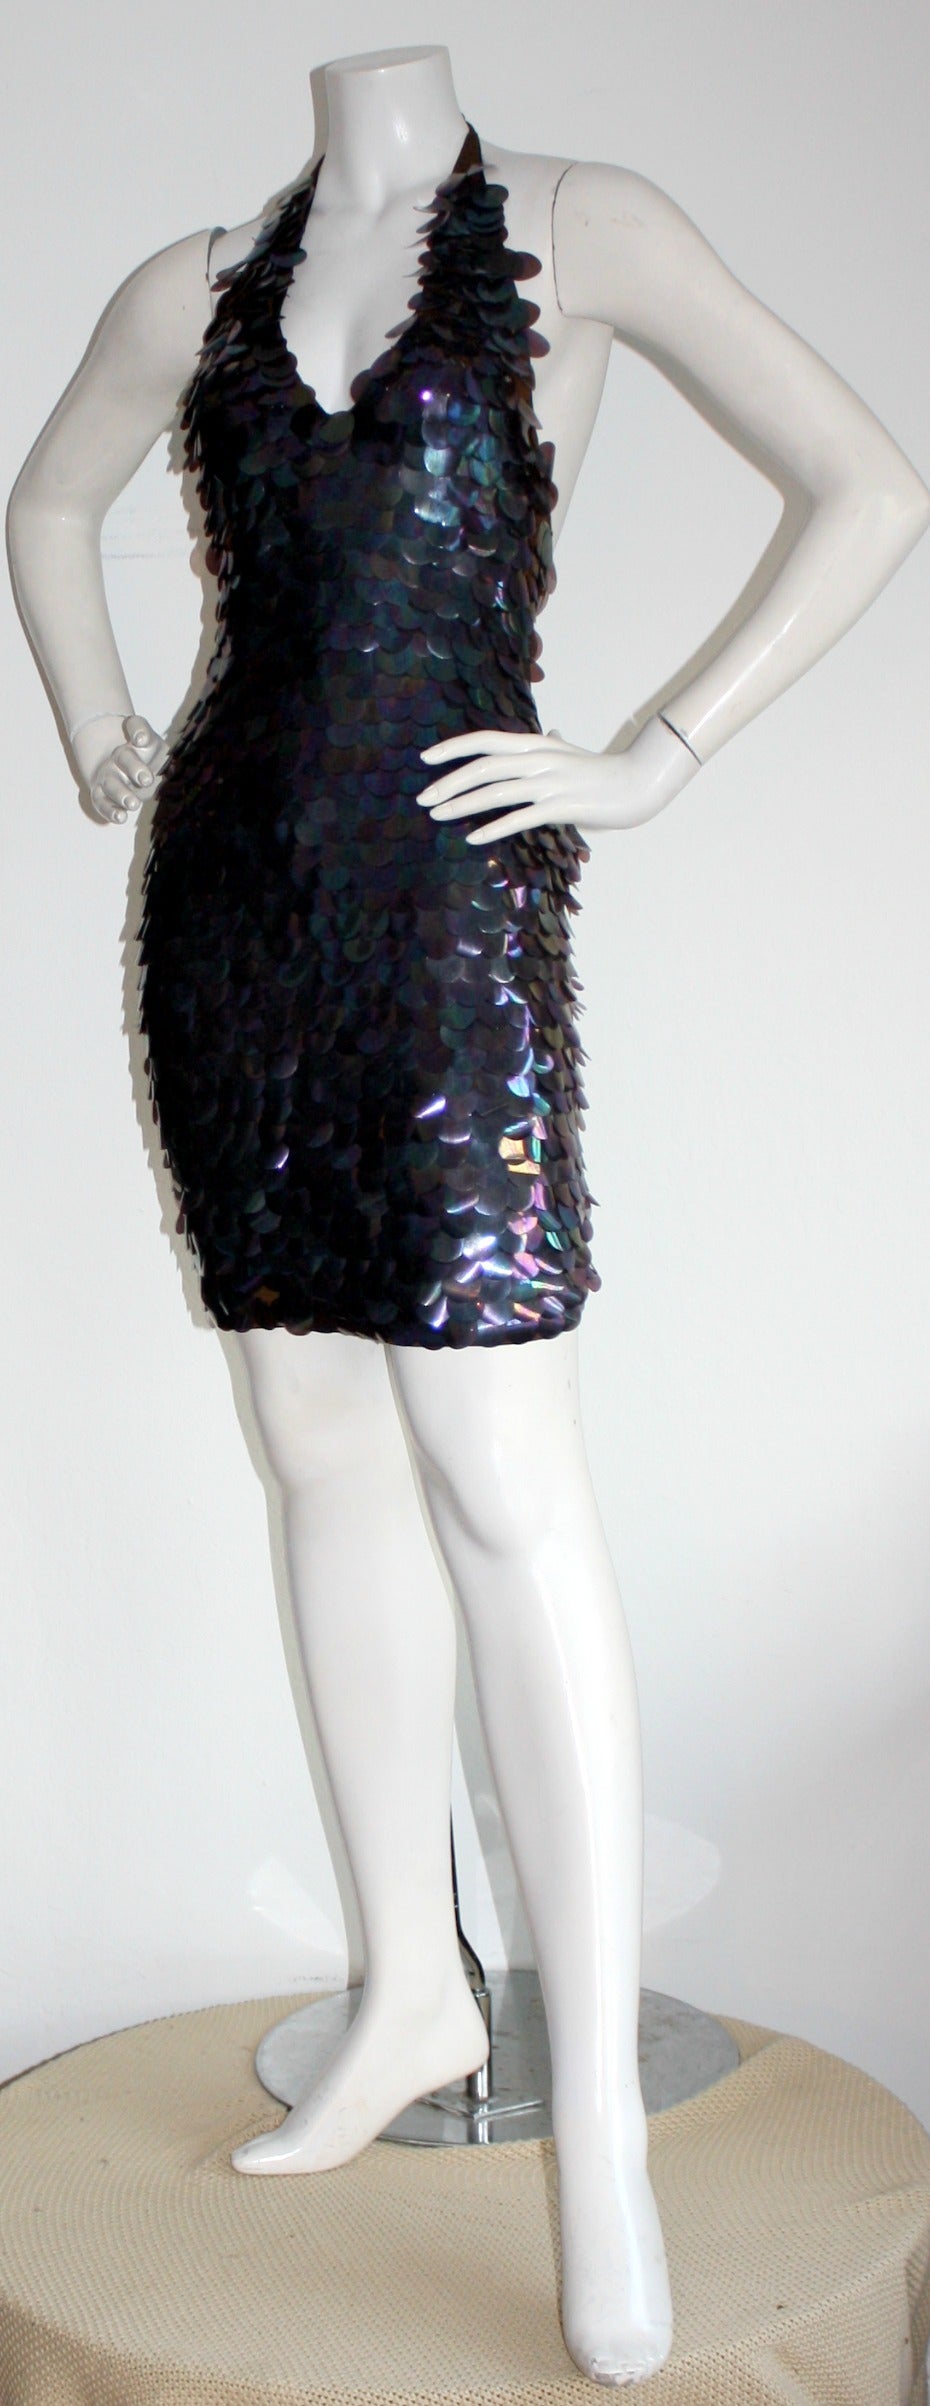 Incredible vintage C.D. Greene purple Paillettes dress! Sexy halter style, encrusted with large sequin purple discs throughout. Perfect for New Years!!! Brand new with original tags from Saks in the 1990s. Fully lined. Marked Size